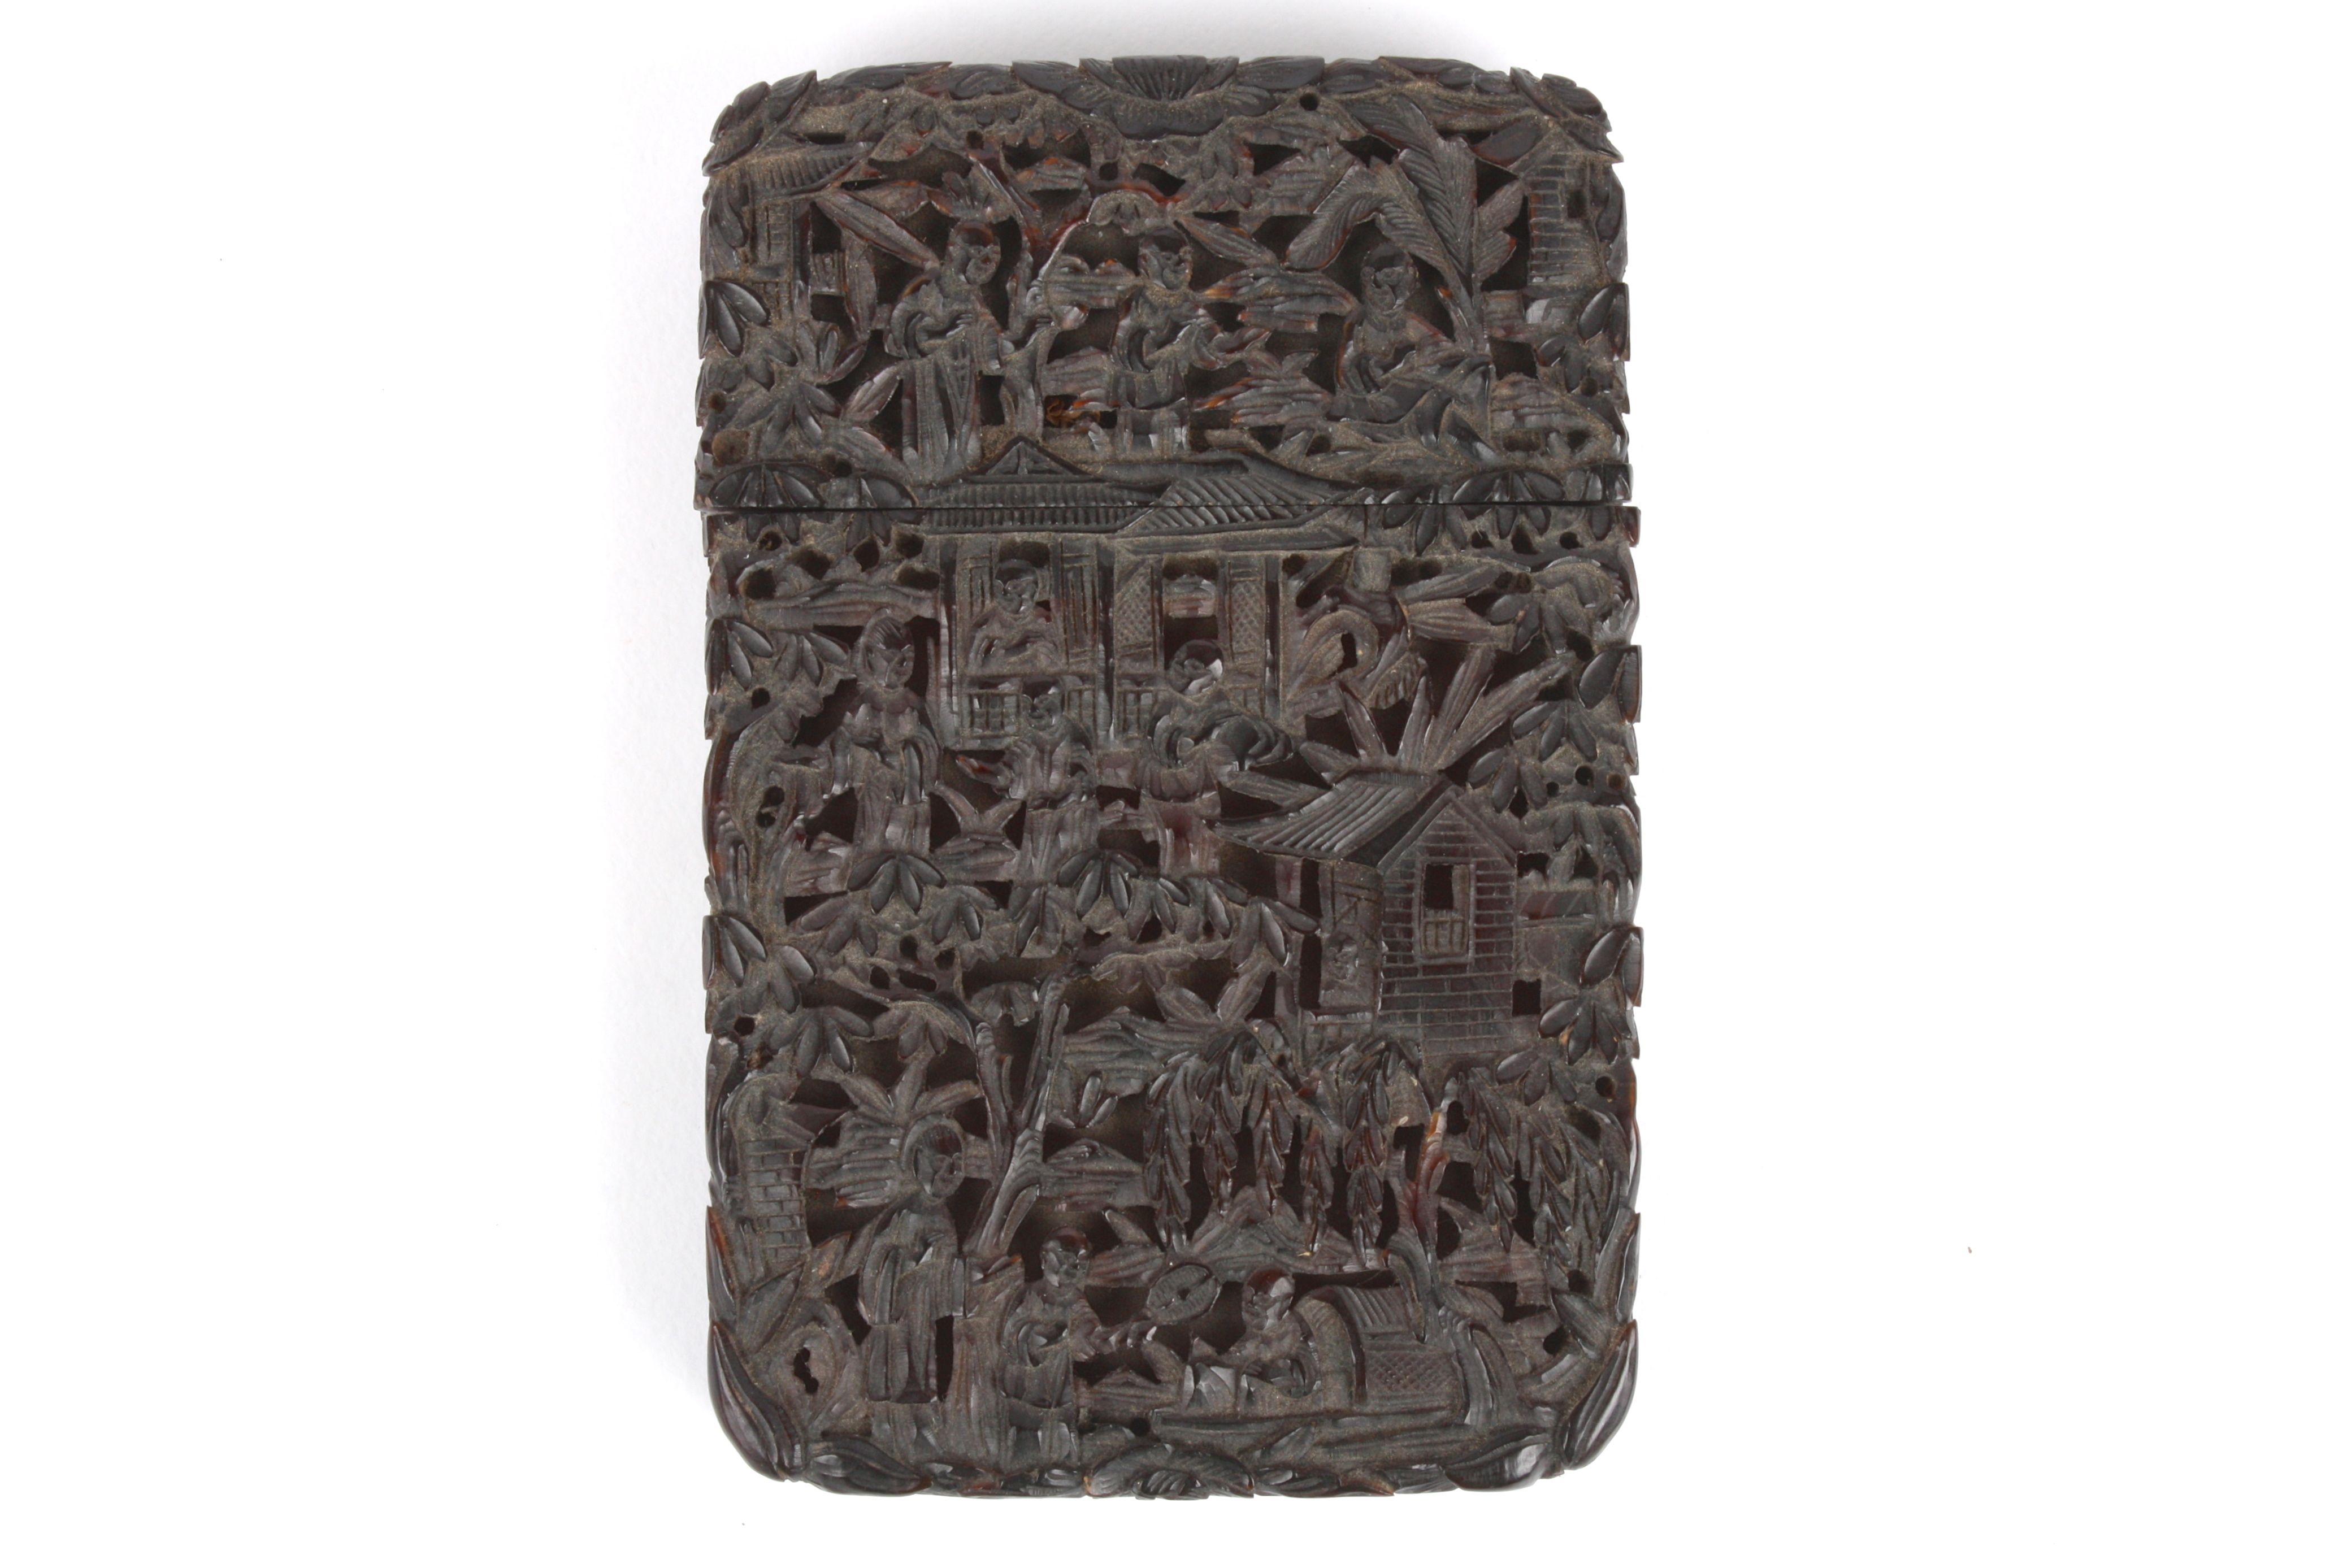 A late 19th century Chinese Canton carved tortoiseshell calling card case finely carved throughout